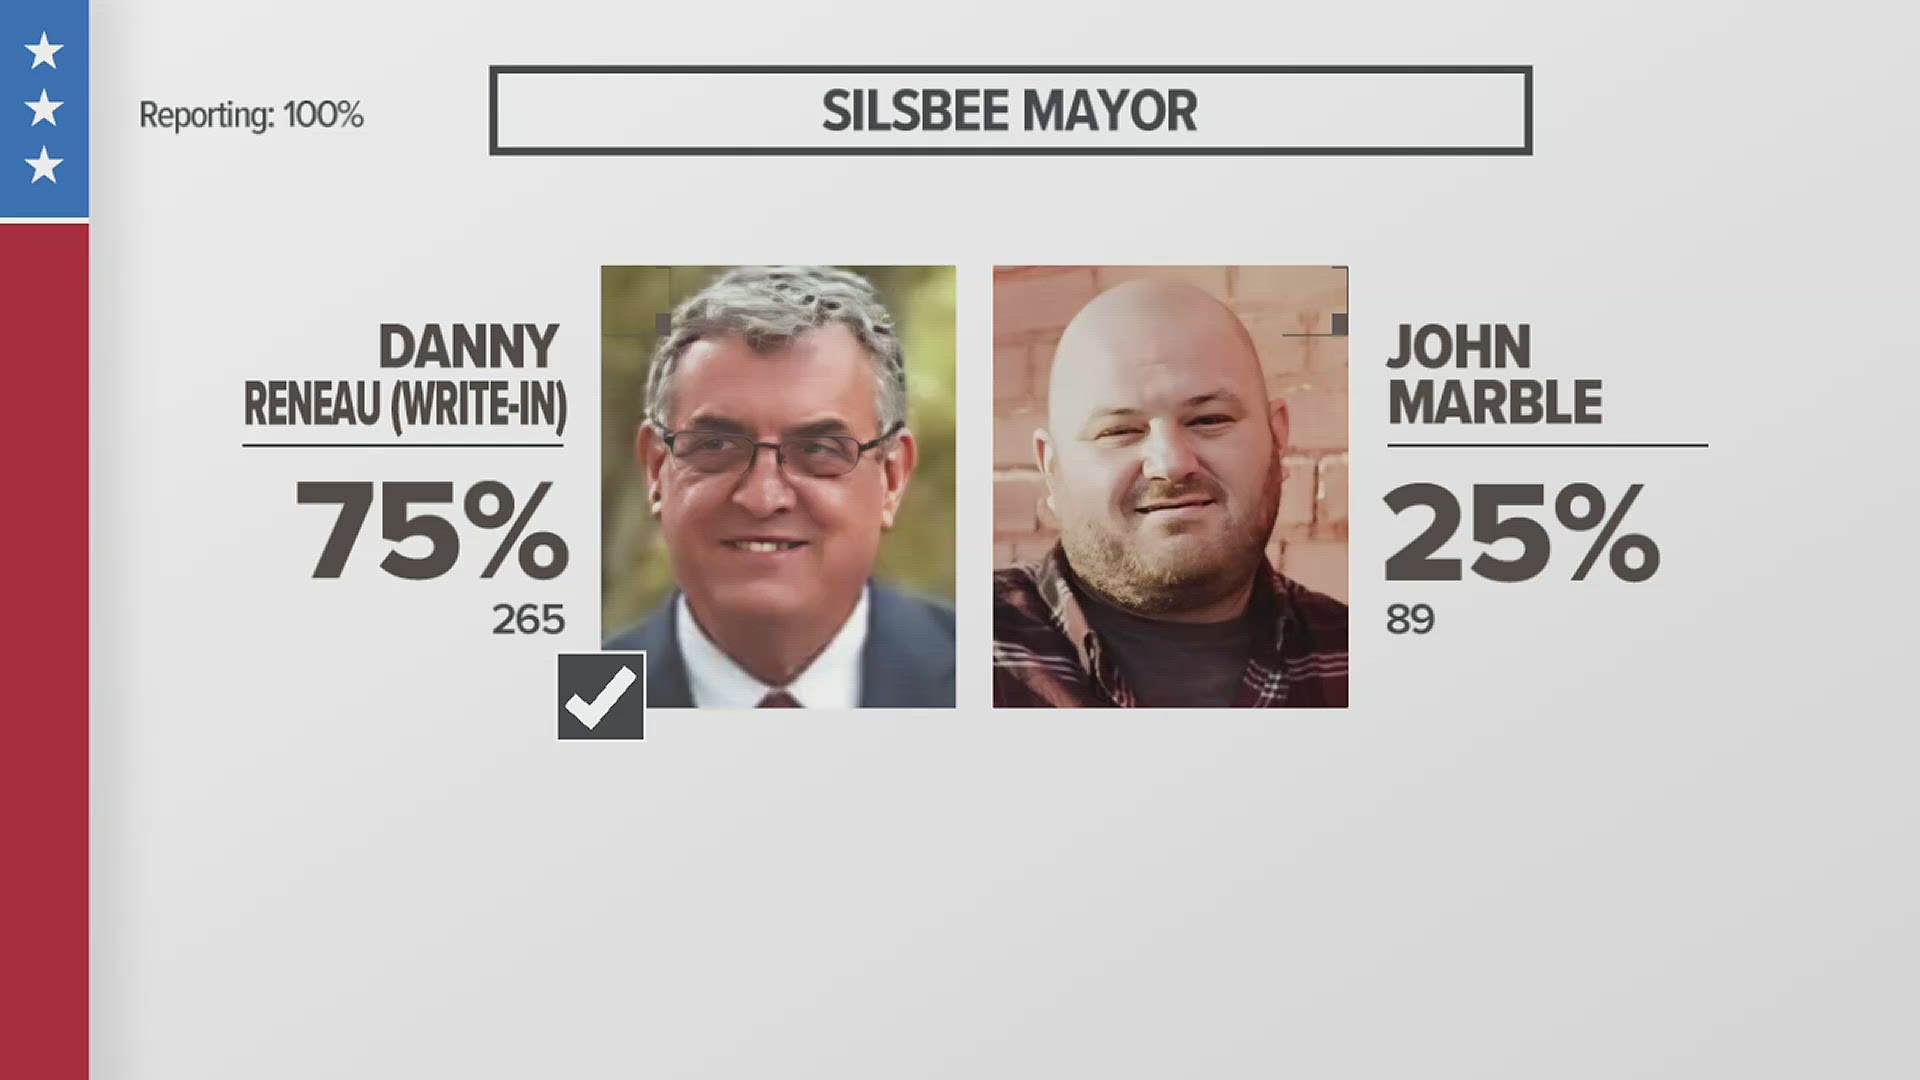 Now that he has been elected, Danny Reneau hopes to create change and prosperity throughout the city of Silsbee.